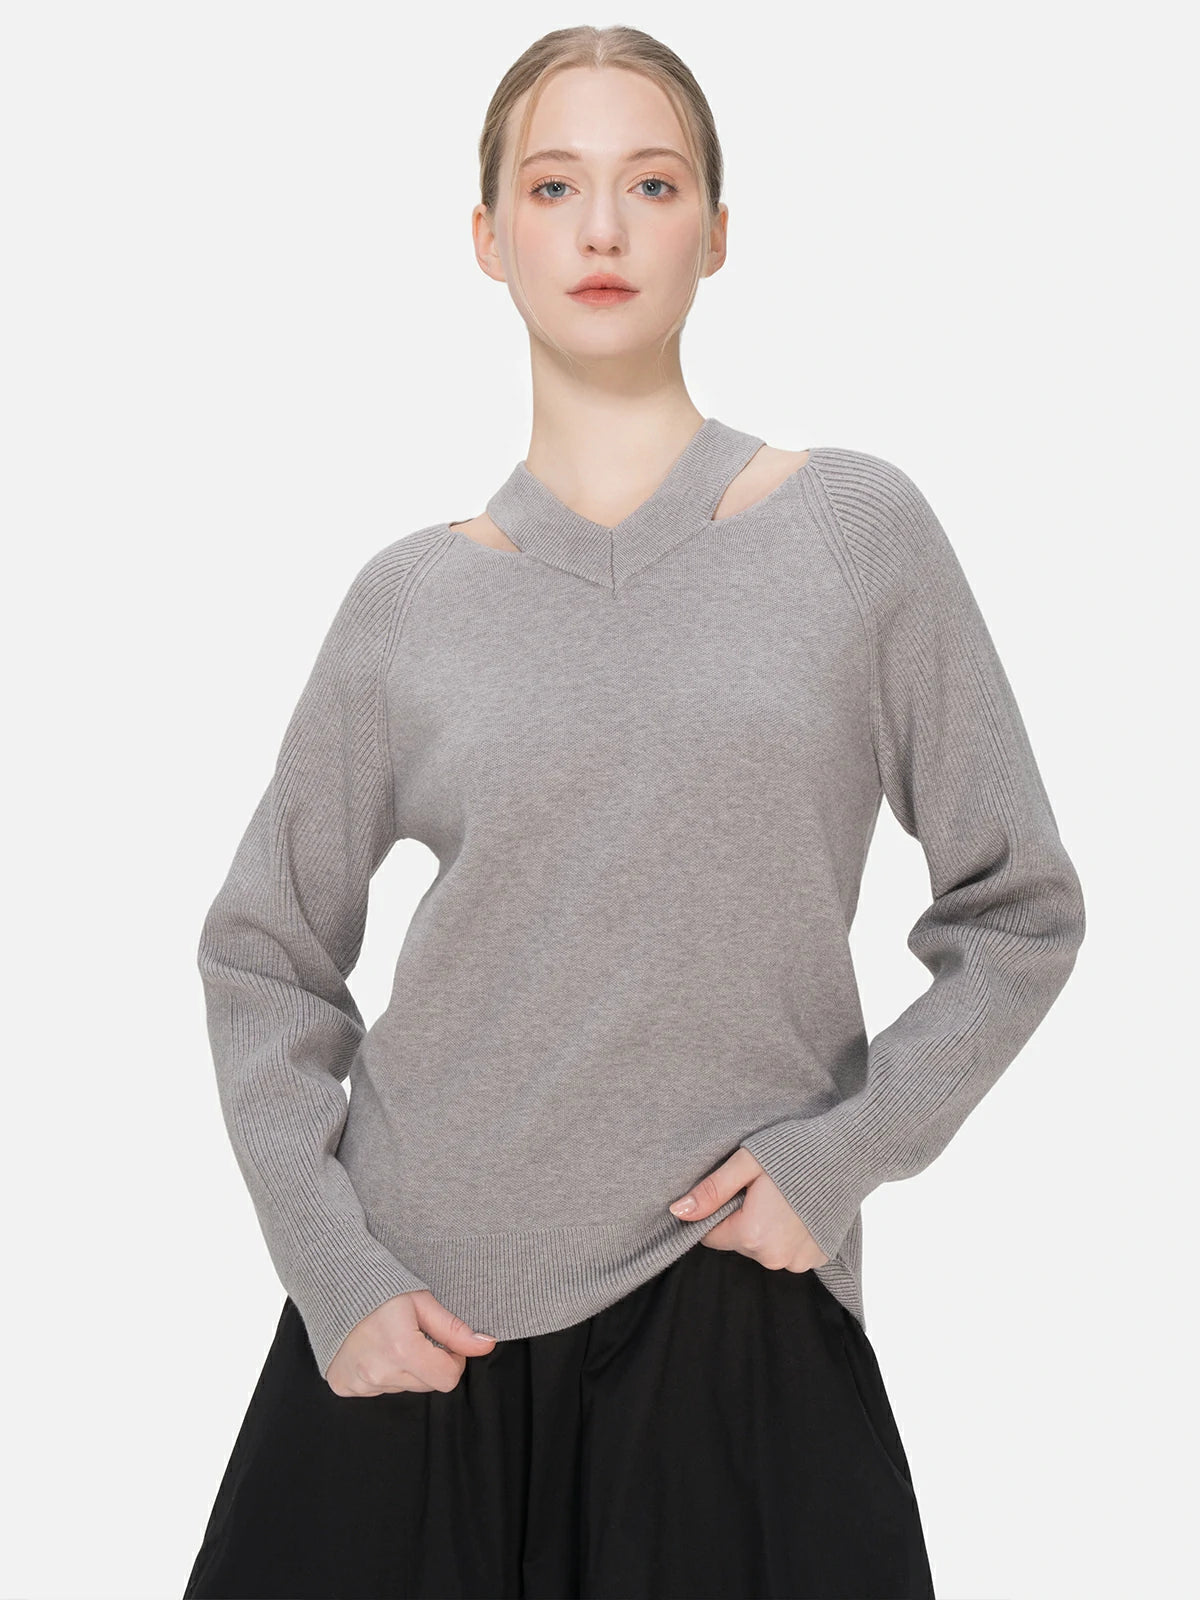 The edgy hollow pattern in a deconstructed design pullover sweater